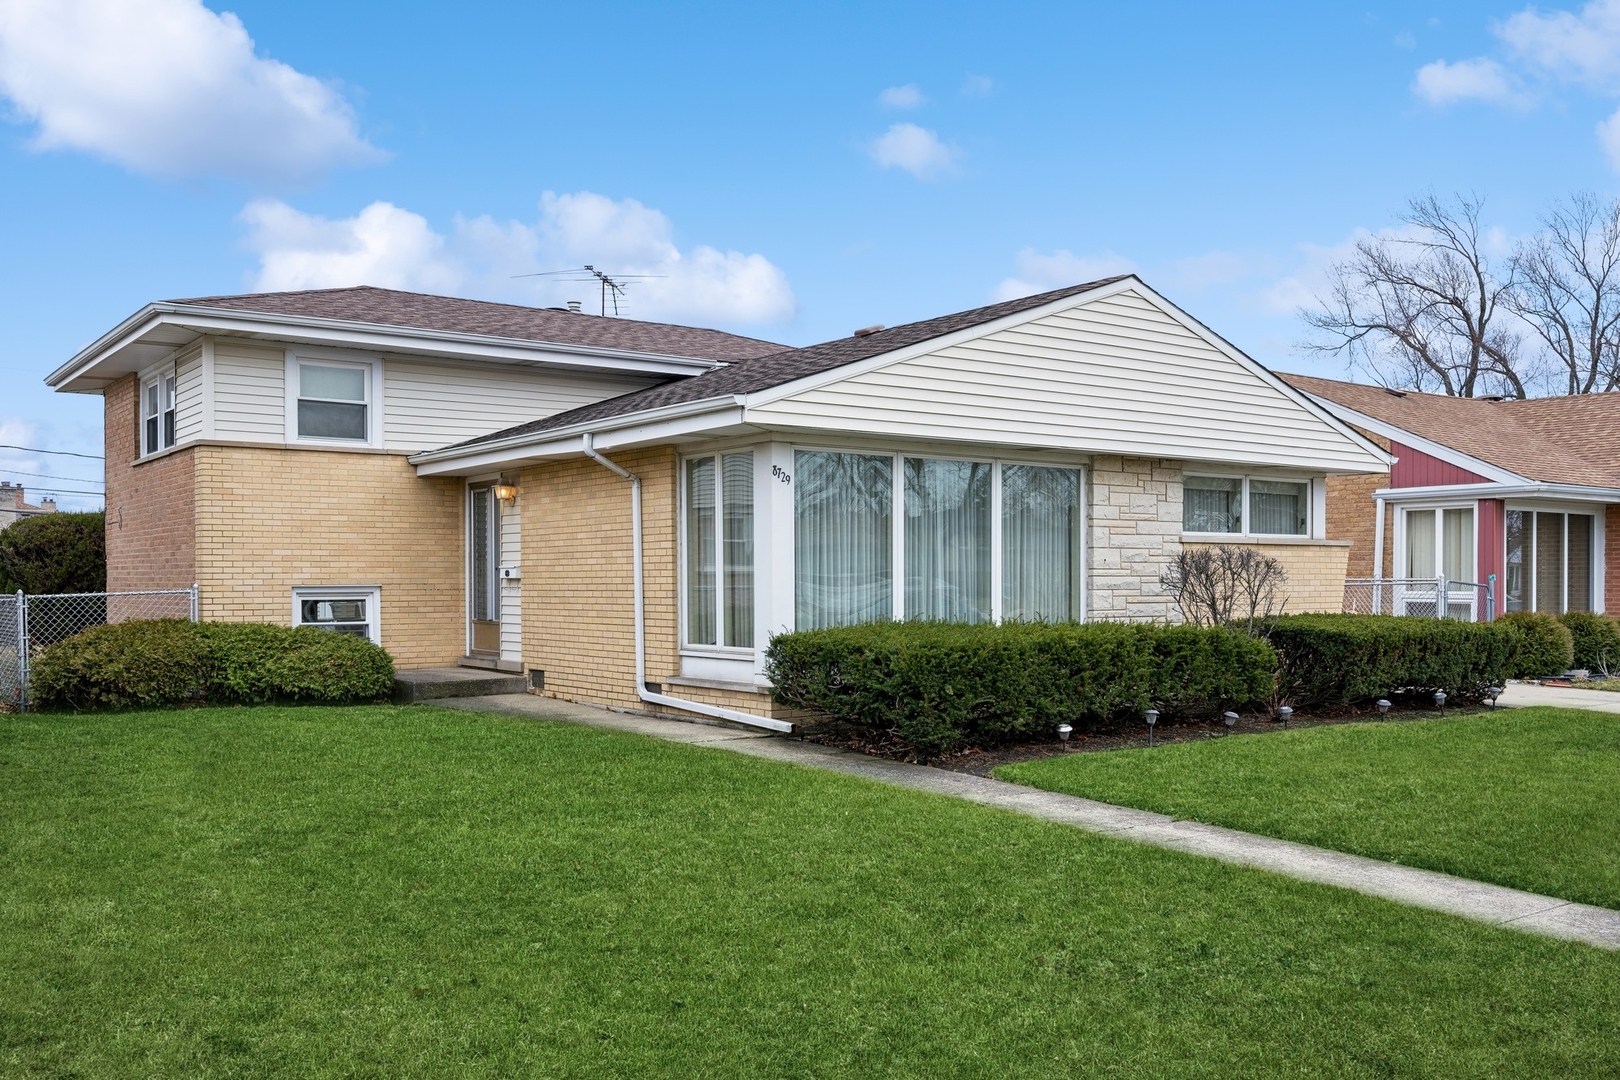 Air Conditioning - Skokie, IL Homes for Sale